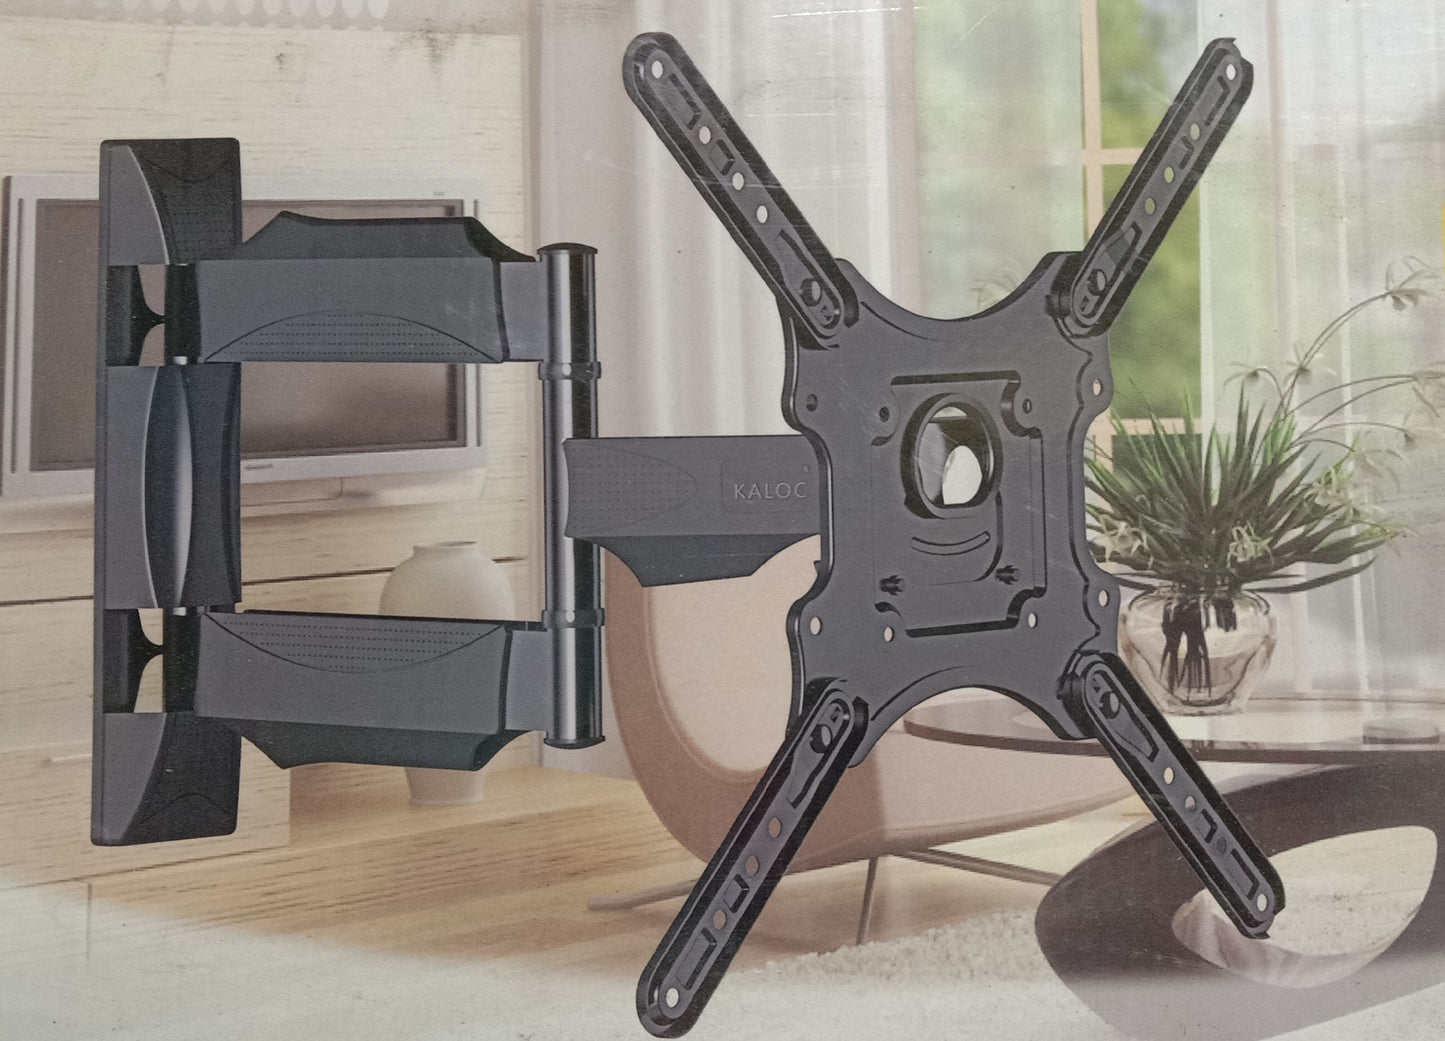 LED / LCD TV Wall mount Stand Tilting Model 32 inch to 55 inch with all Screws and Studs